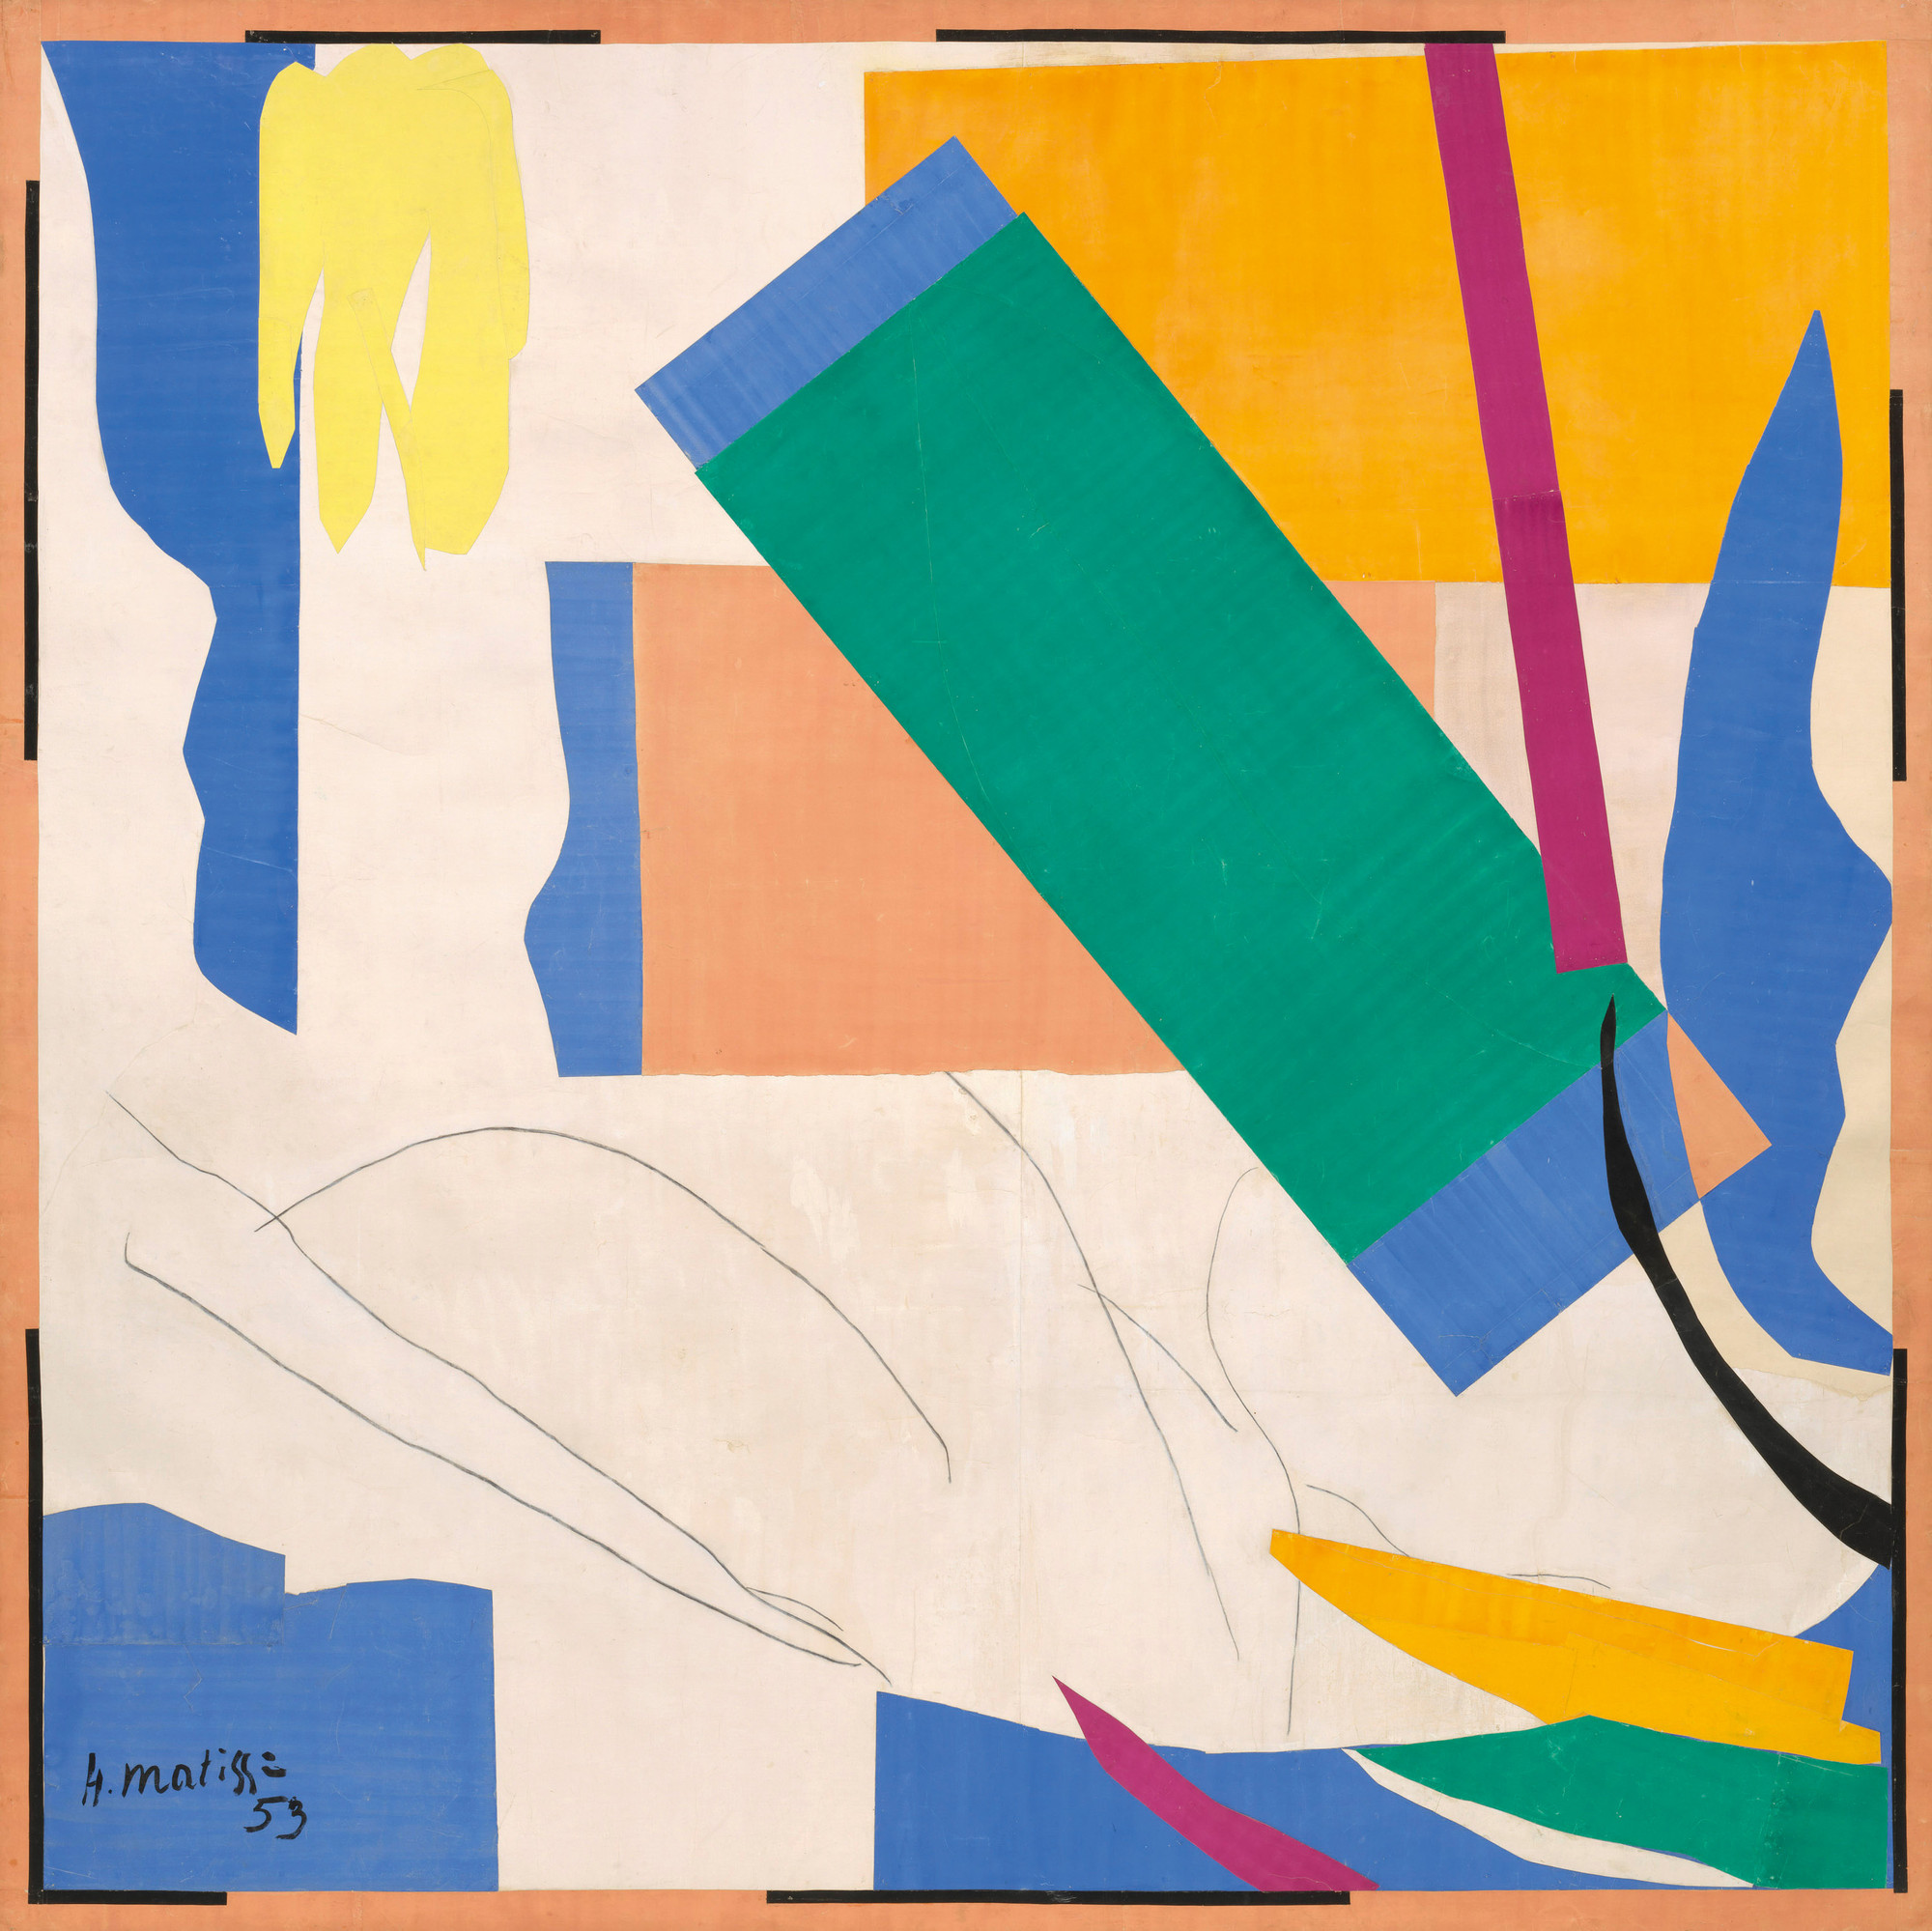 bh forpligtelse garn Henri Matisse: The Cut-Outs | MoMA